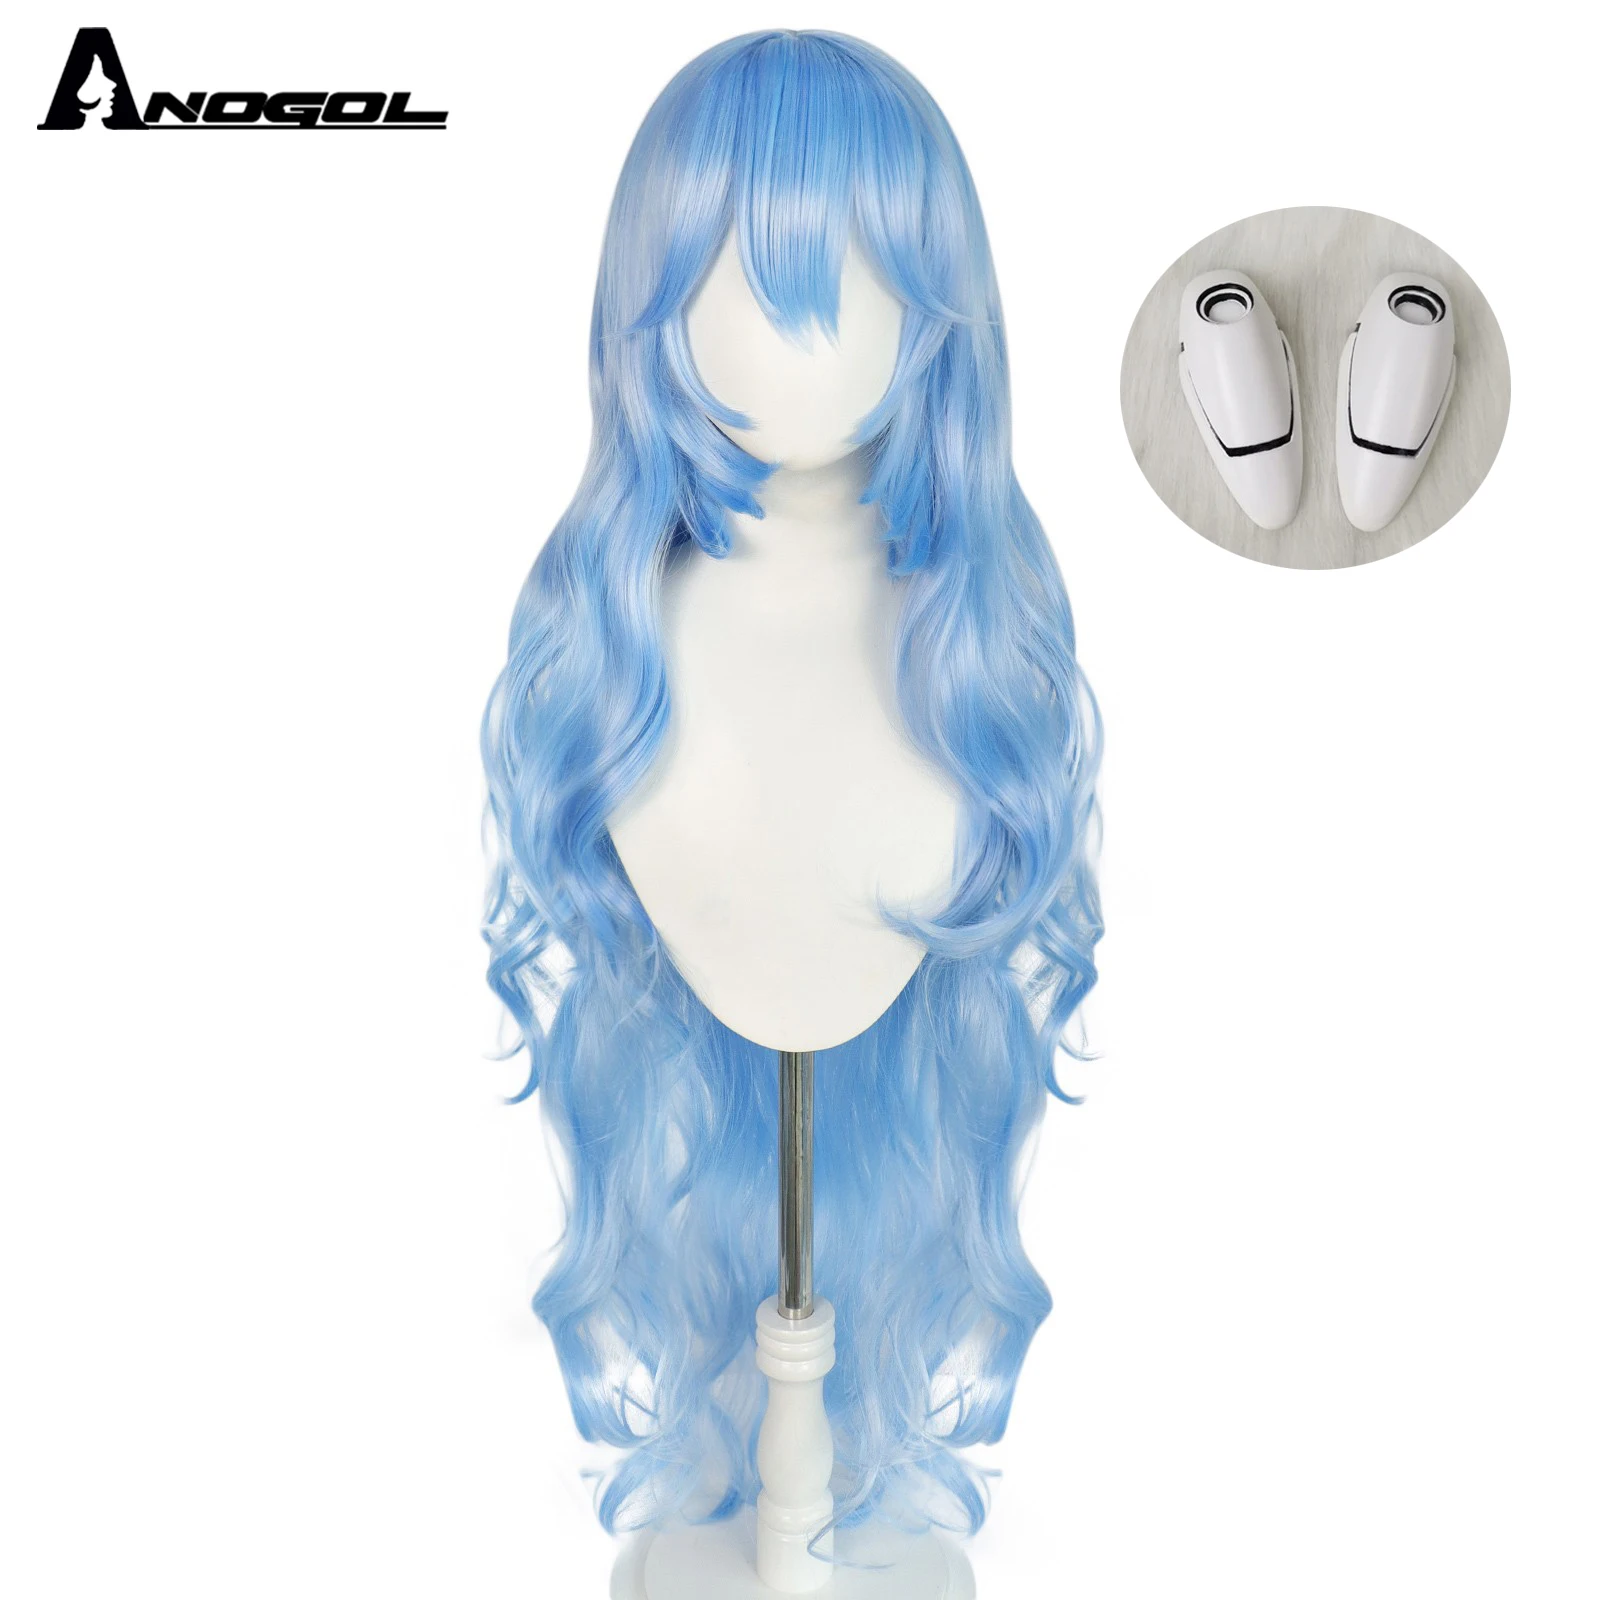 ANOGOL Synthetic EVA Ayanami Rei Cosplay Wigs Long Sky Bkue Wavy Wig with White Props Headwear Haripins For Role Play Halloween